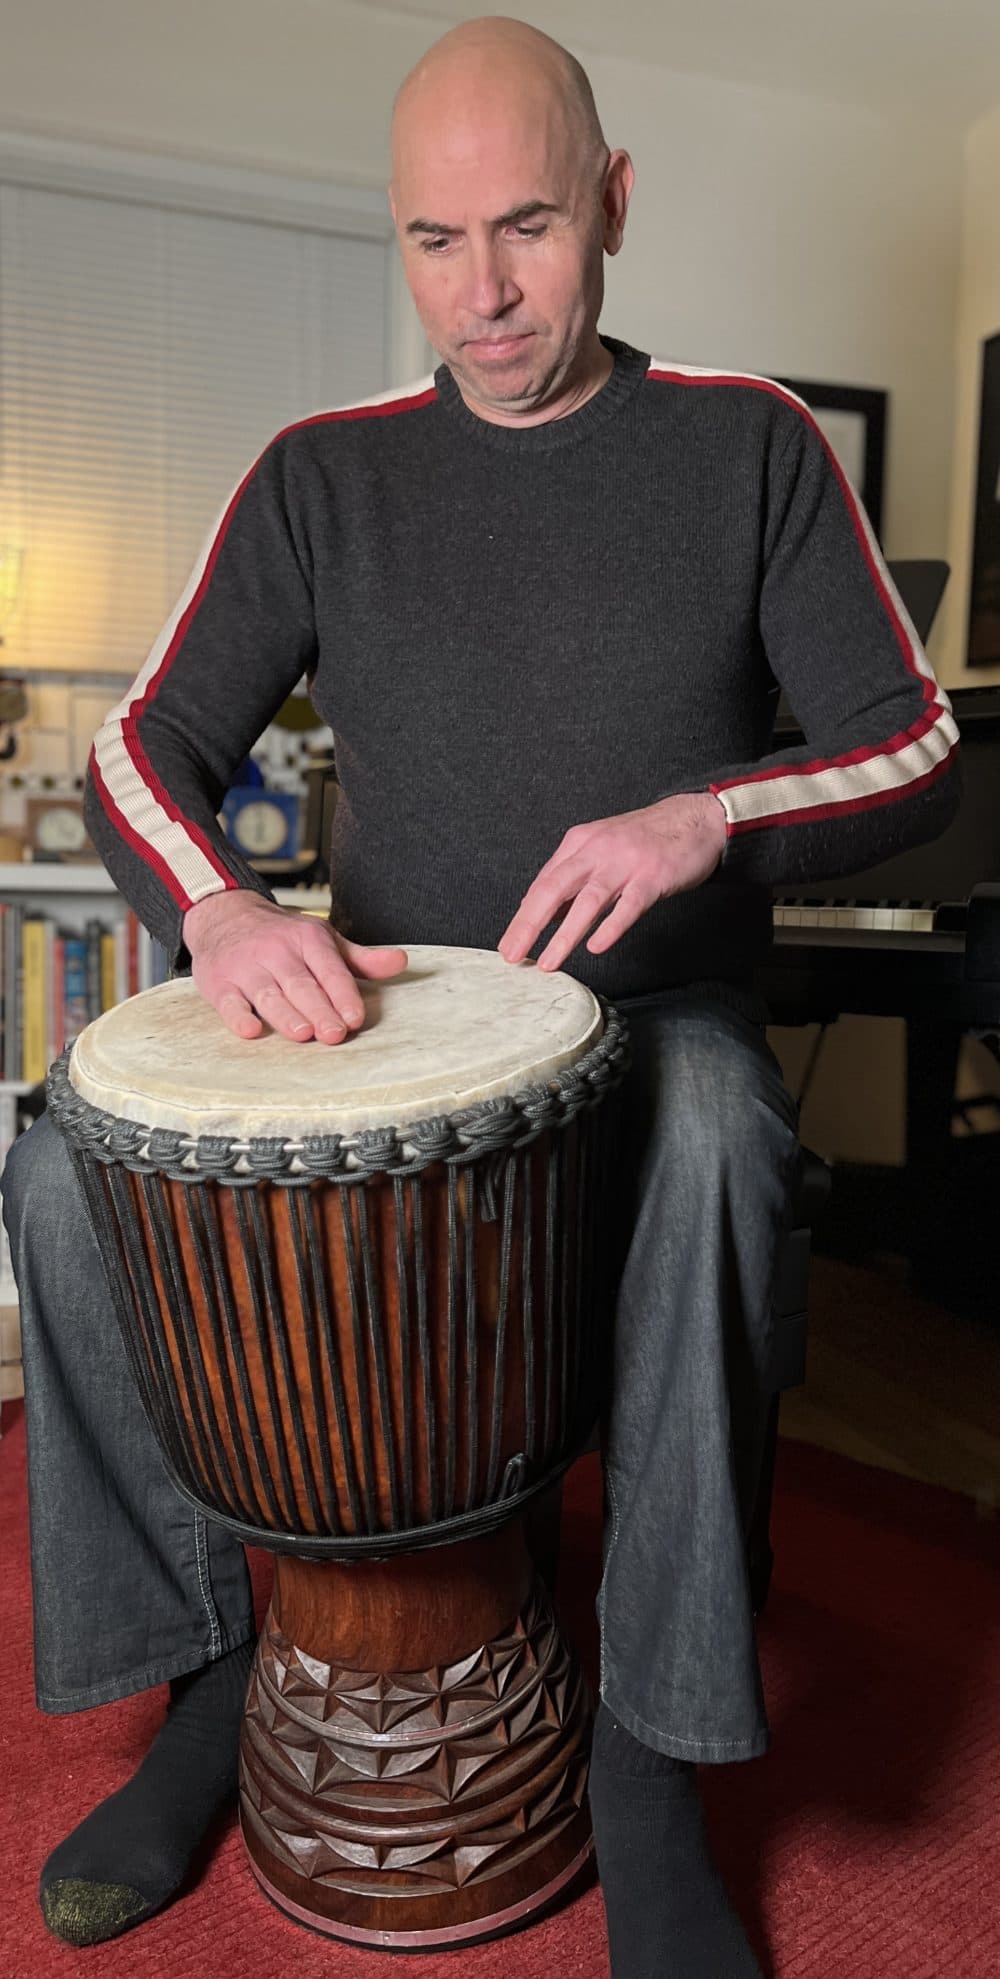 Mali’s Bambara people say the name of the djembe (pictured here played by Eric Shimelonis) comes from the saying "Anke djé, anke bé": "everyone gather together in peace.” (Courtesy of Rebecca Sheir)